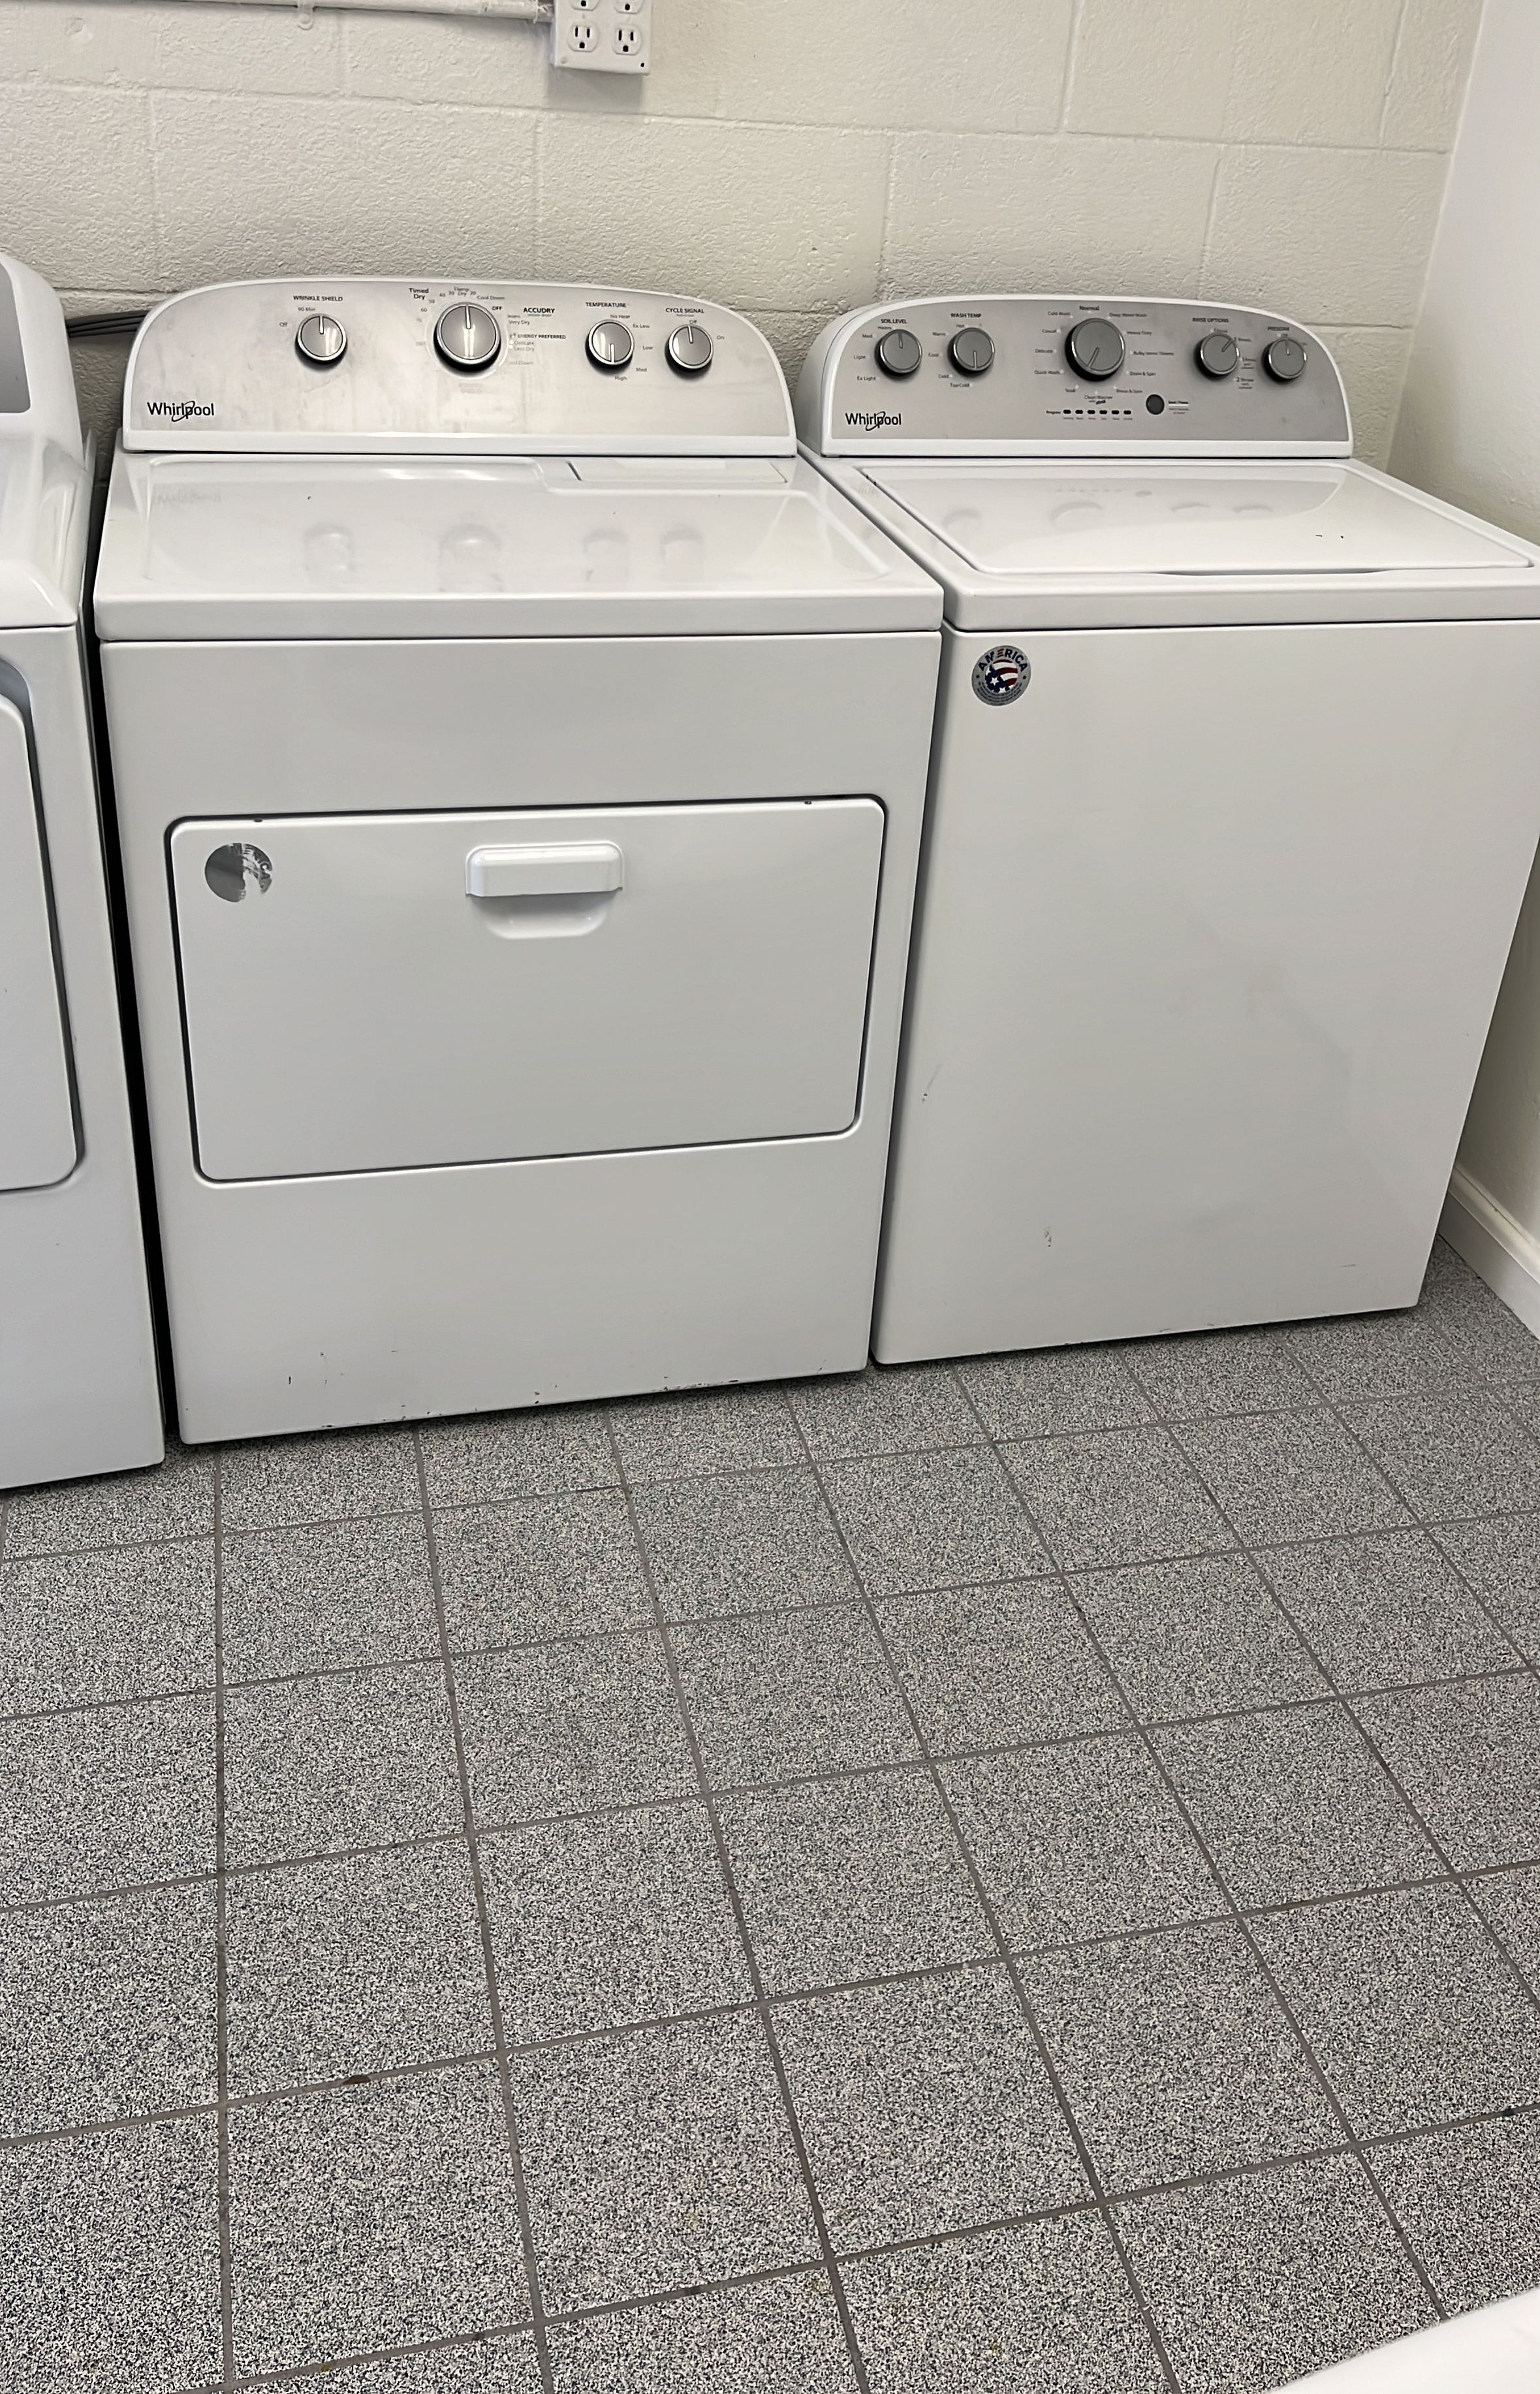 Whirlpool Washer and Dryer Sets Electric Automatic Very Quiet
